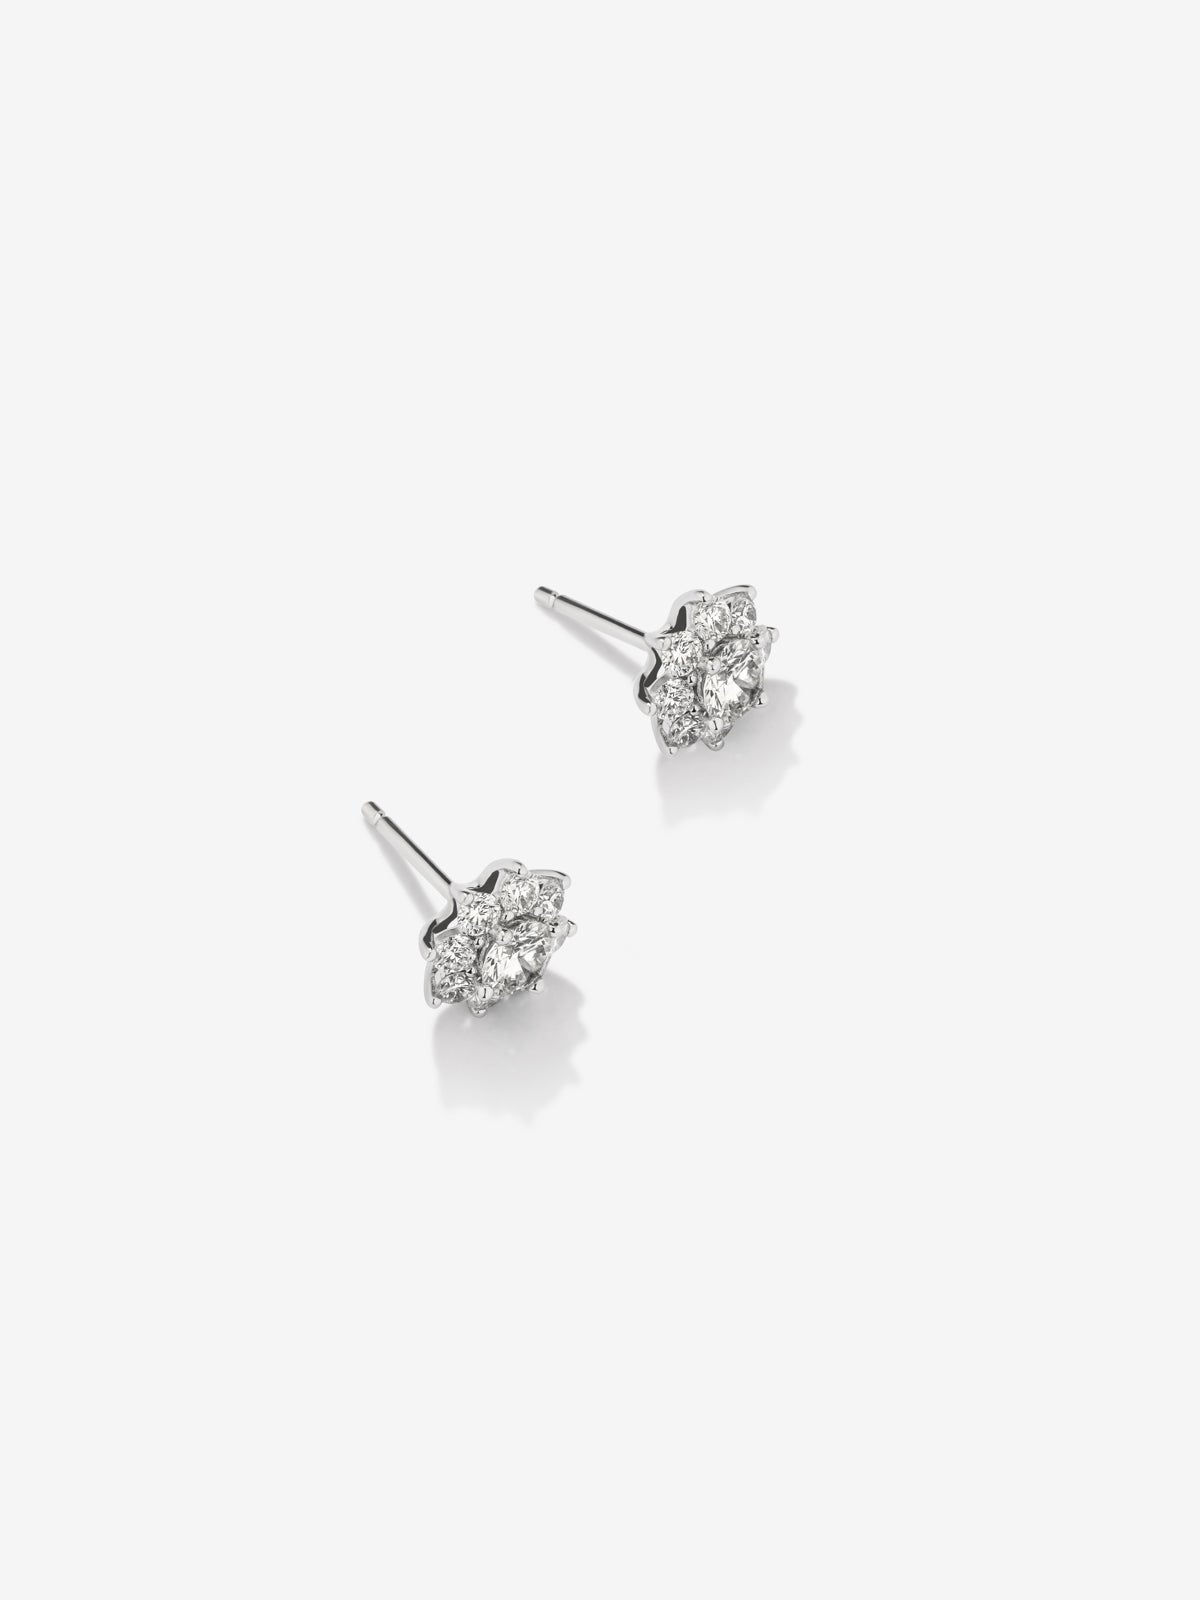 18K white gold earrings with diamonds in bright size of 0.57 CTS star -shaped